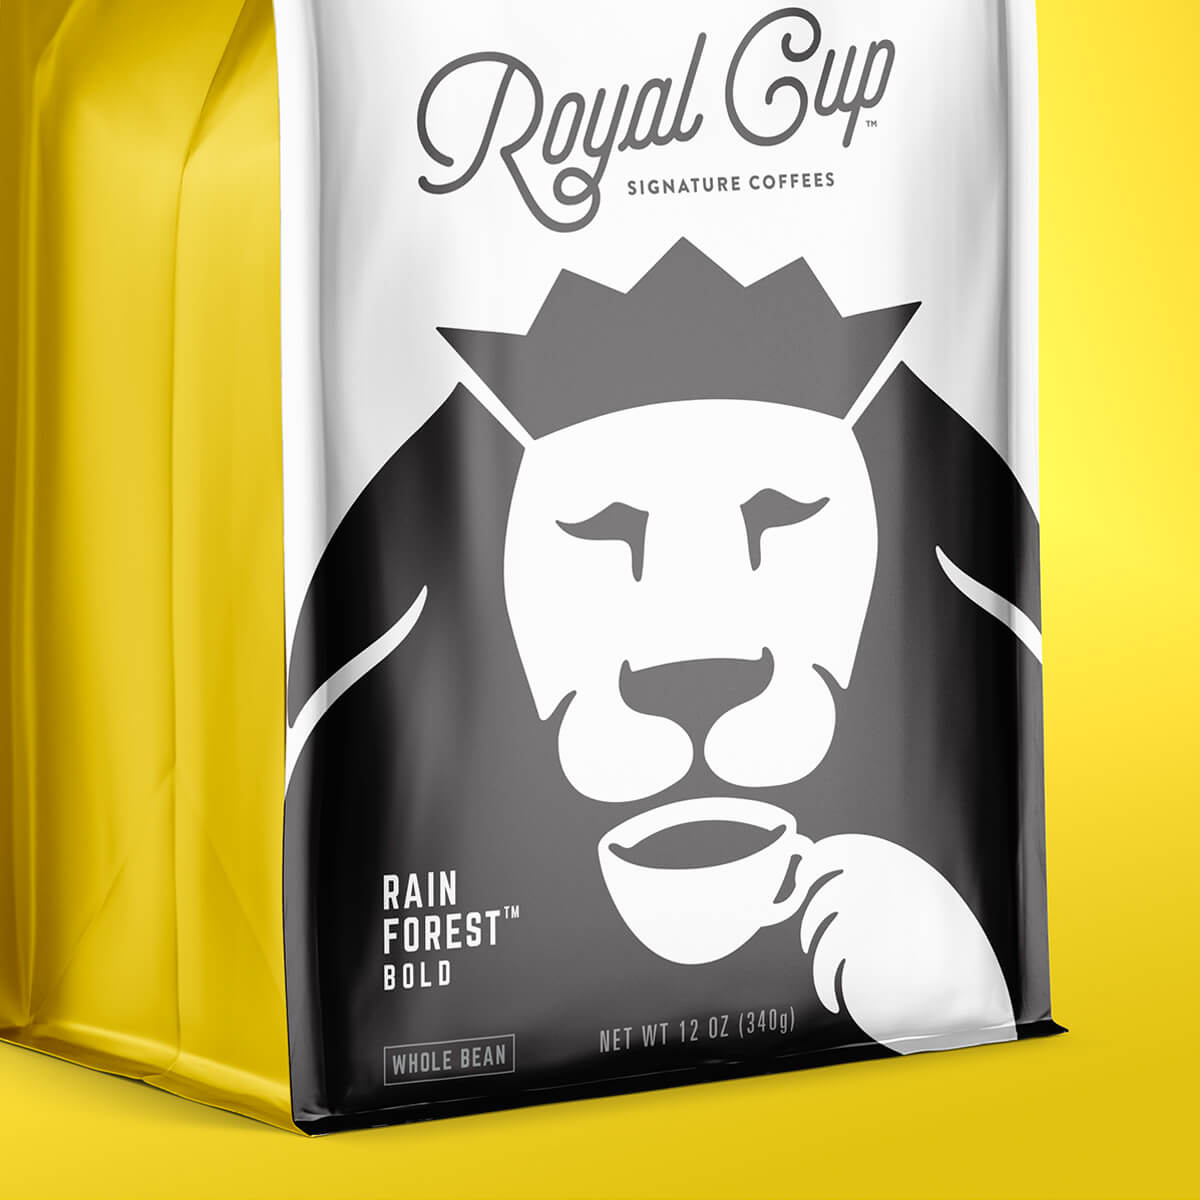 Royal Cup Signature Coffees